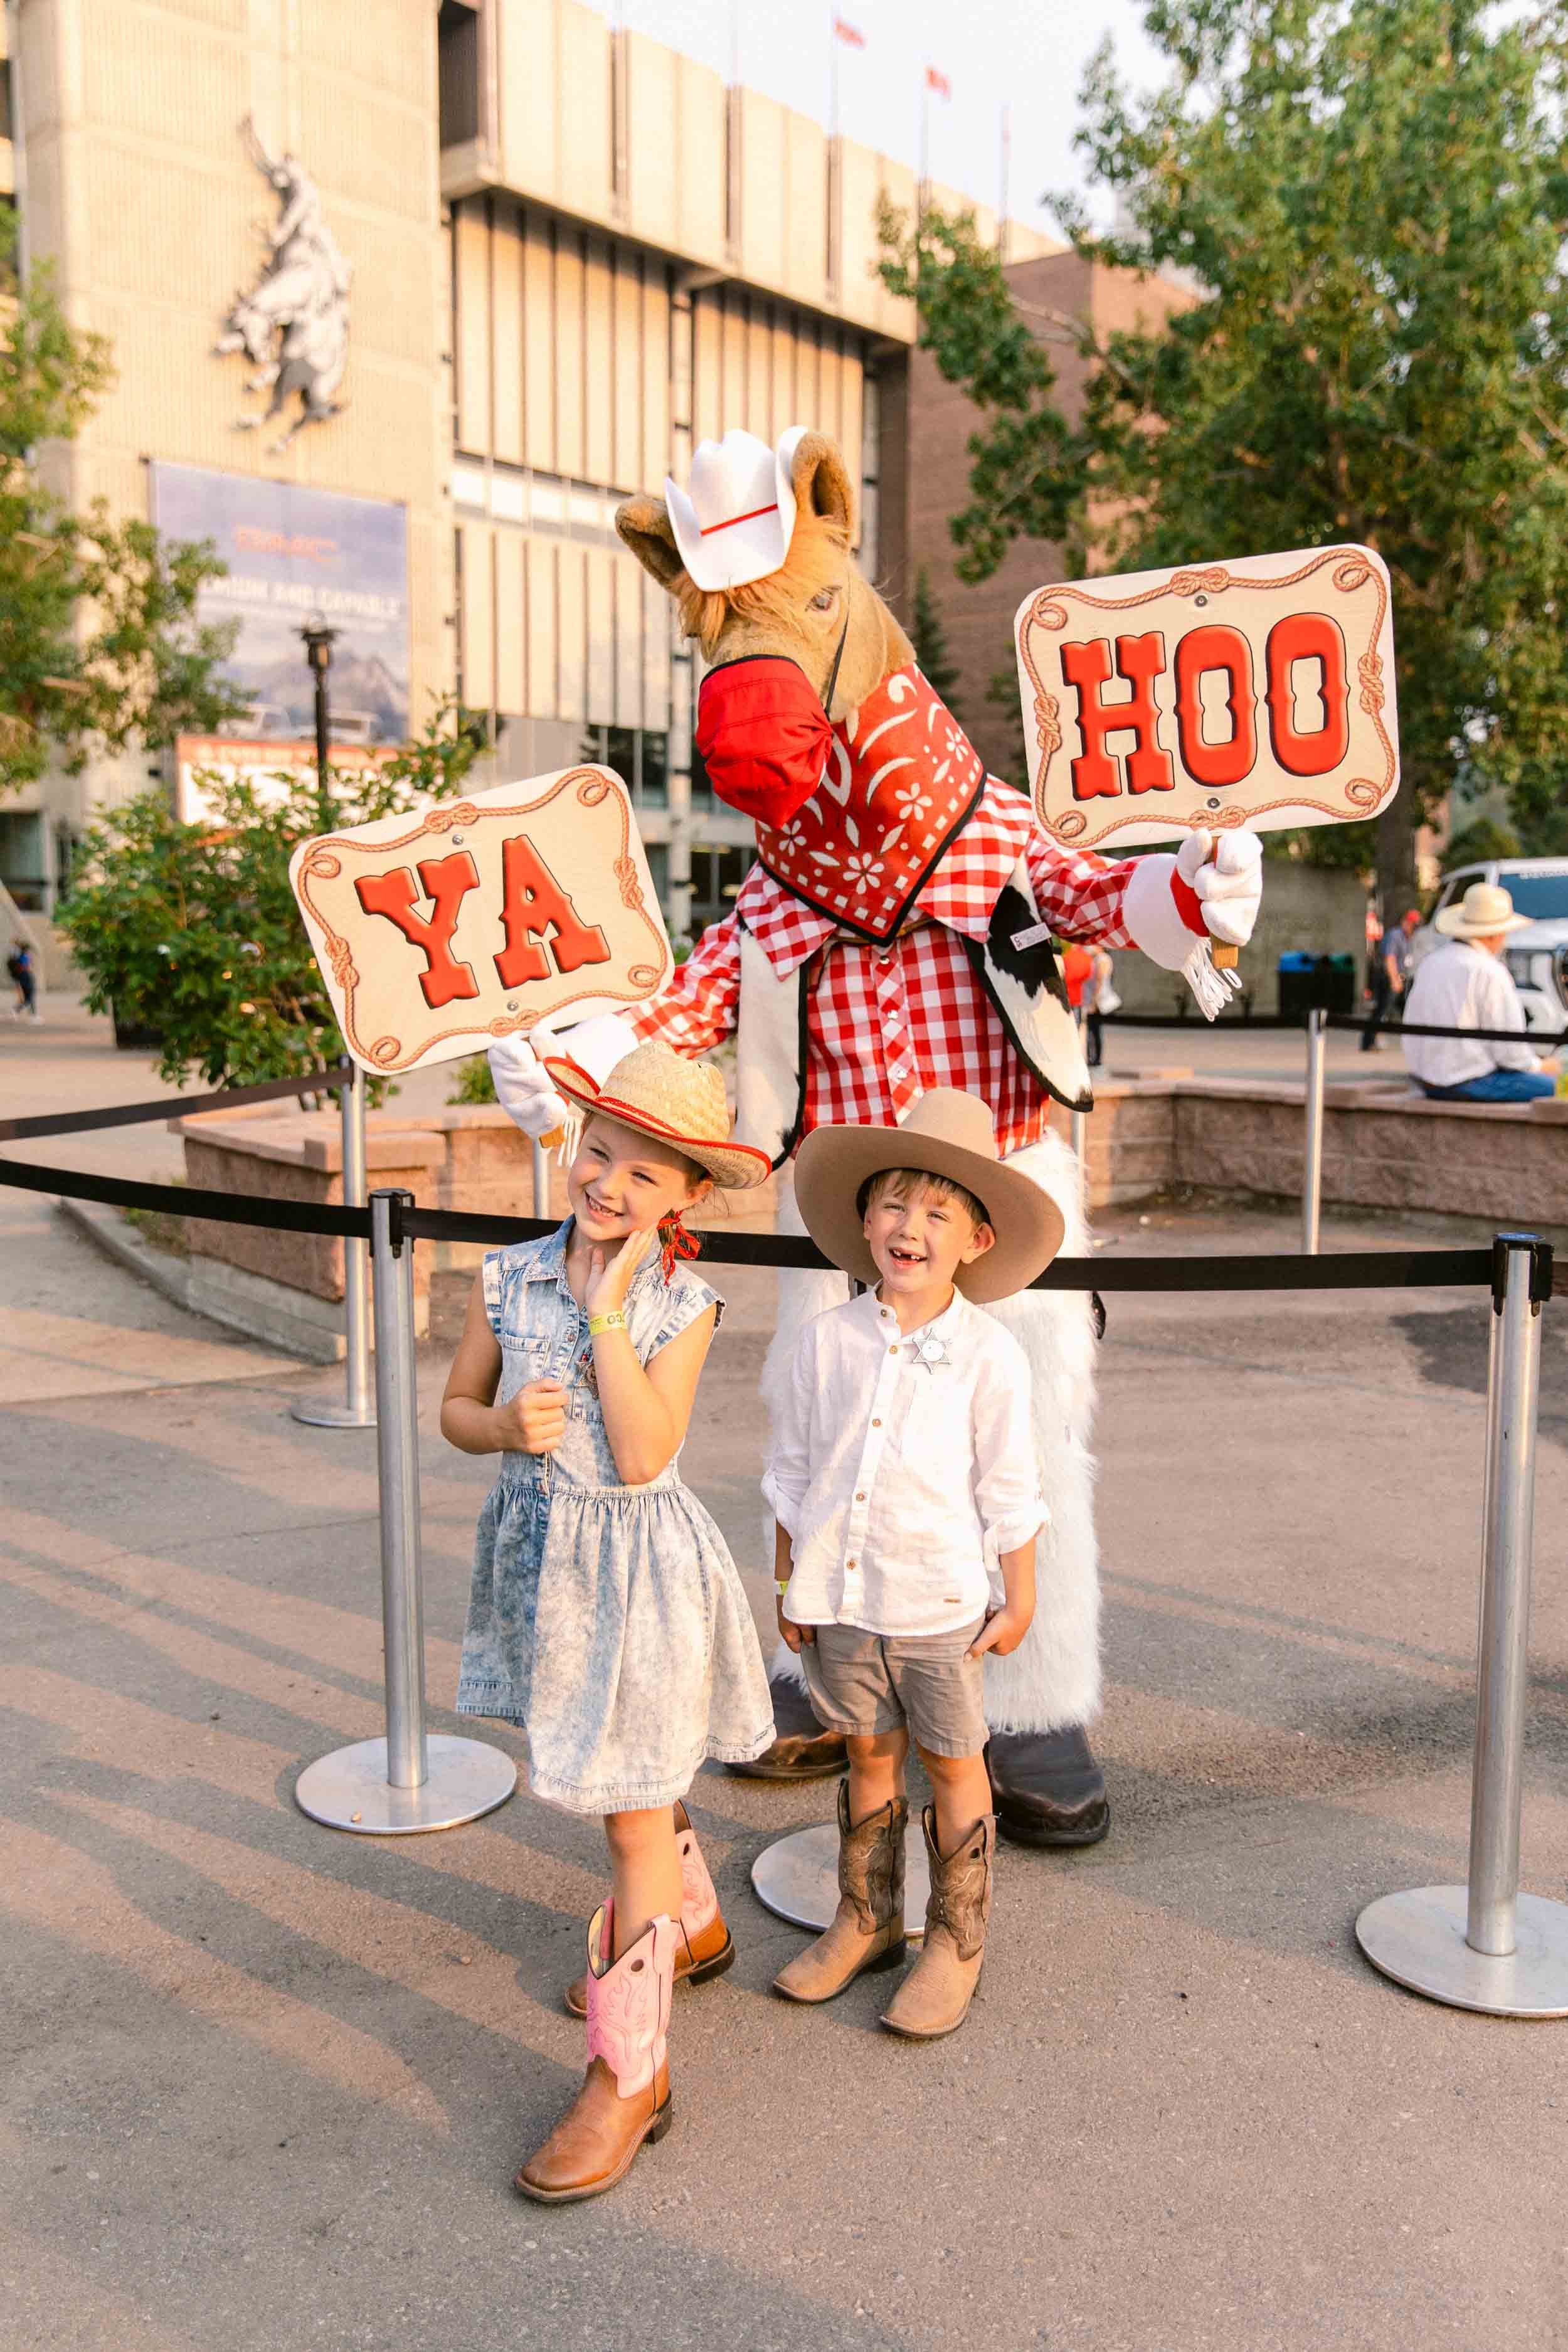 Photo Opps Calgary Stampede 10 Best Place to Take Instagrammable Photos